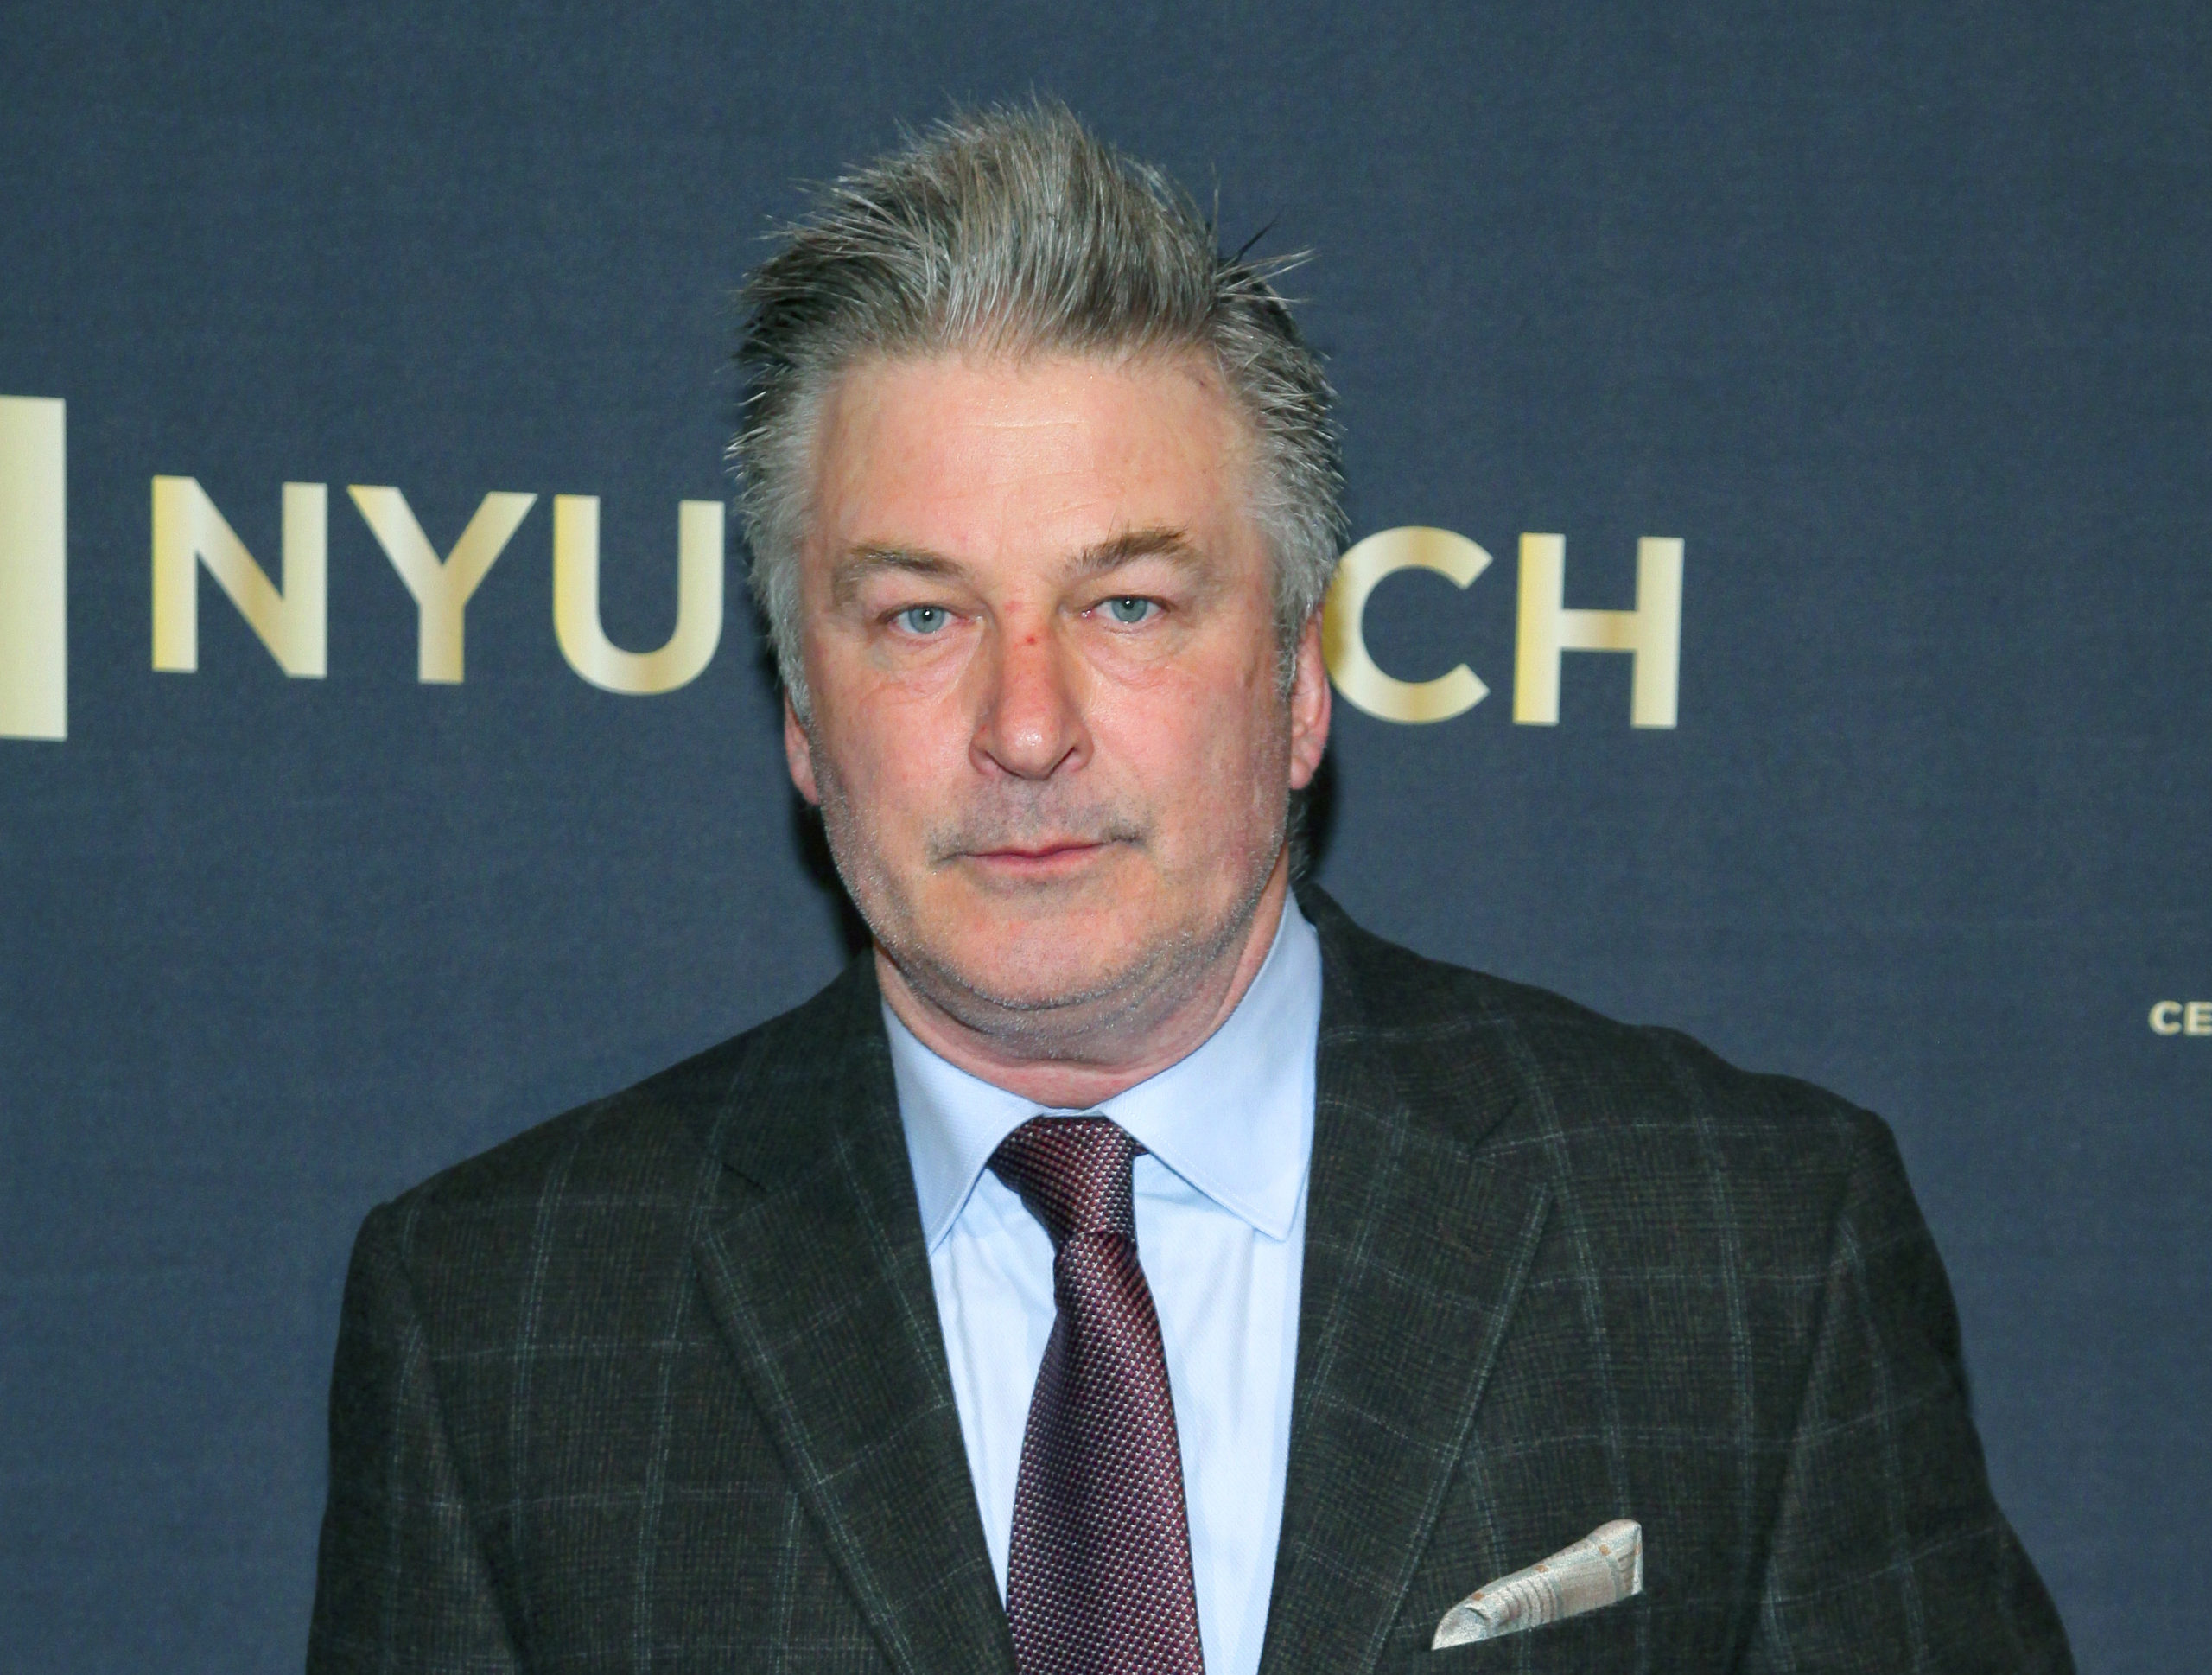 A grand jury indicted Alec Baldwin Friday on an involuntary manslaughter charge in a 2021 fatal shooting that took place during a rehearsal on a movie set in New Mexico, reviving a dormant case against the A-list actor.